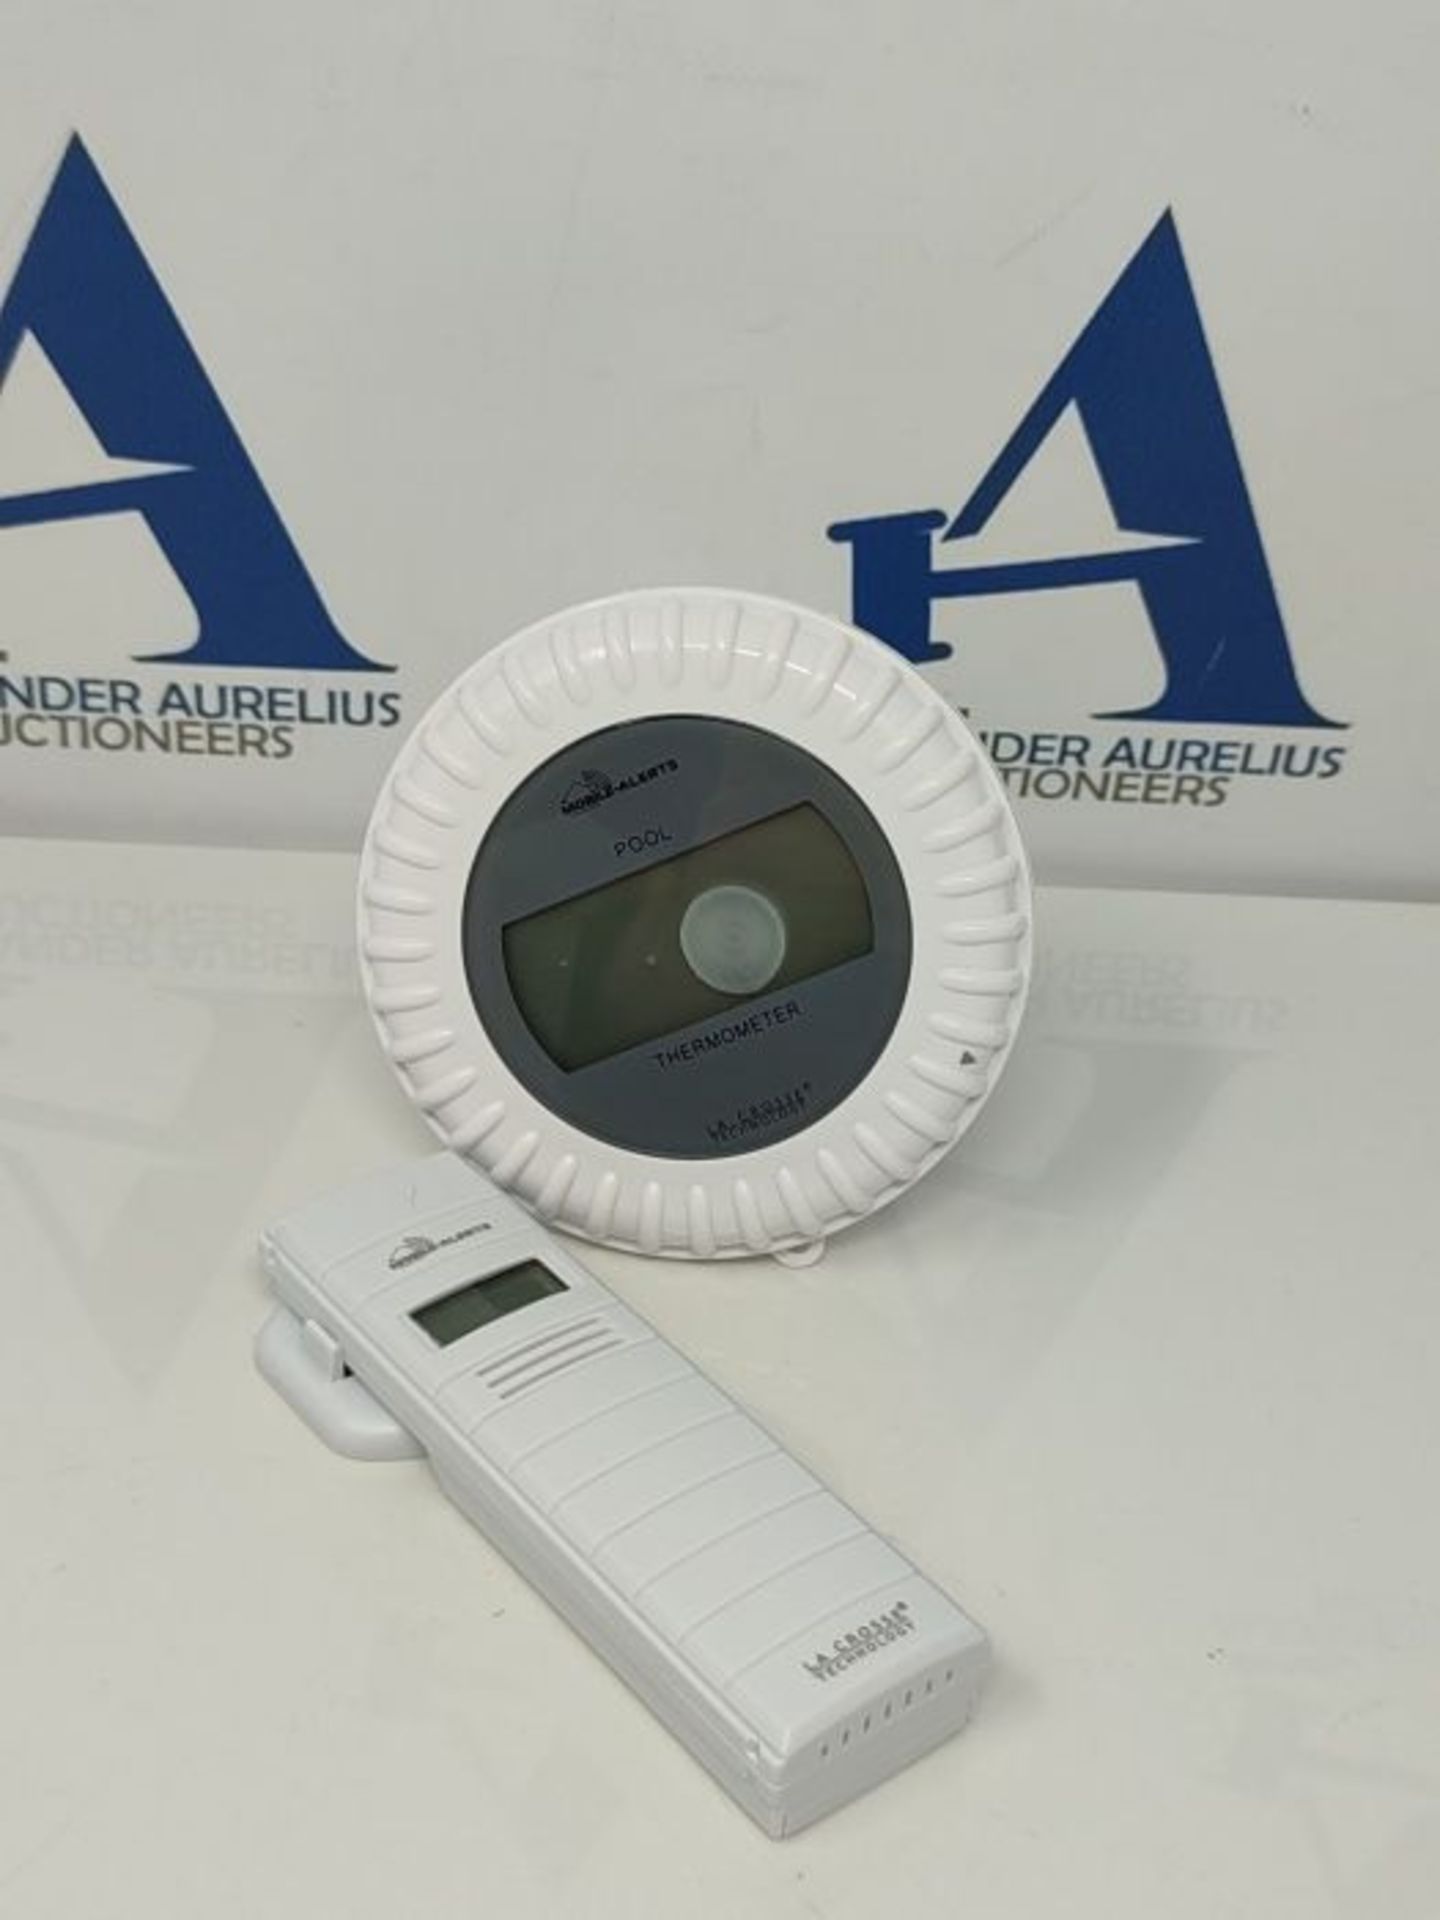 La Crosse Technology - MA10700 Mobile Alerts Connected Pool Kit containing a pool temp - Image 3 of 3